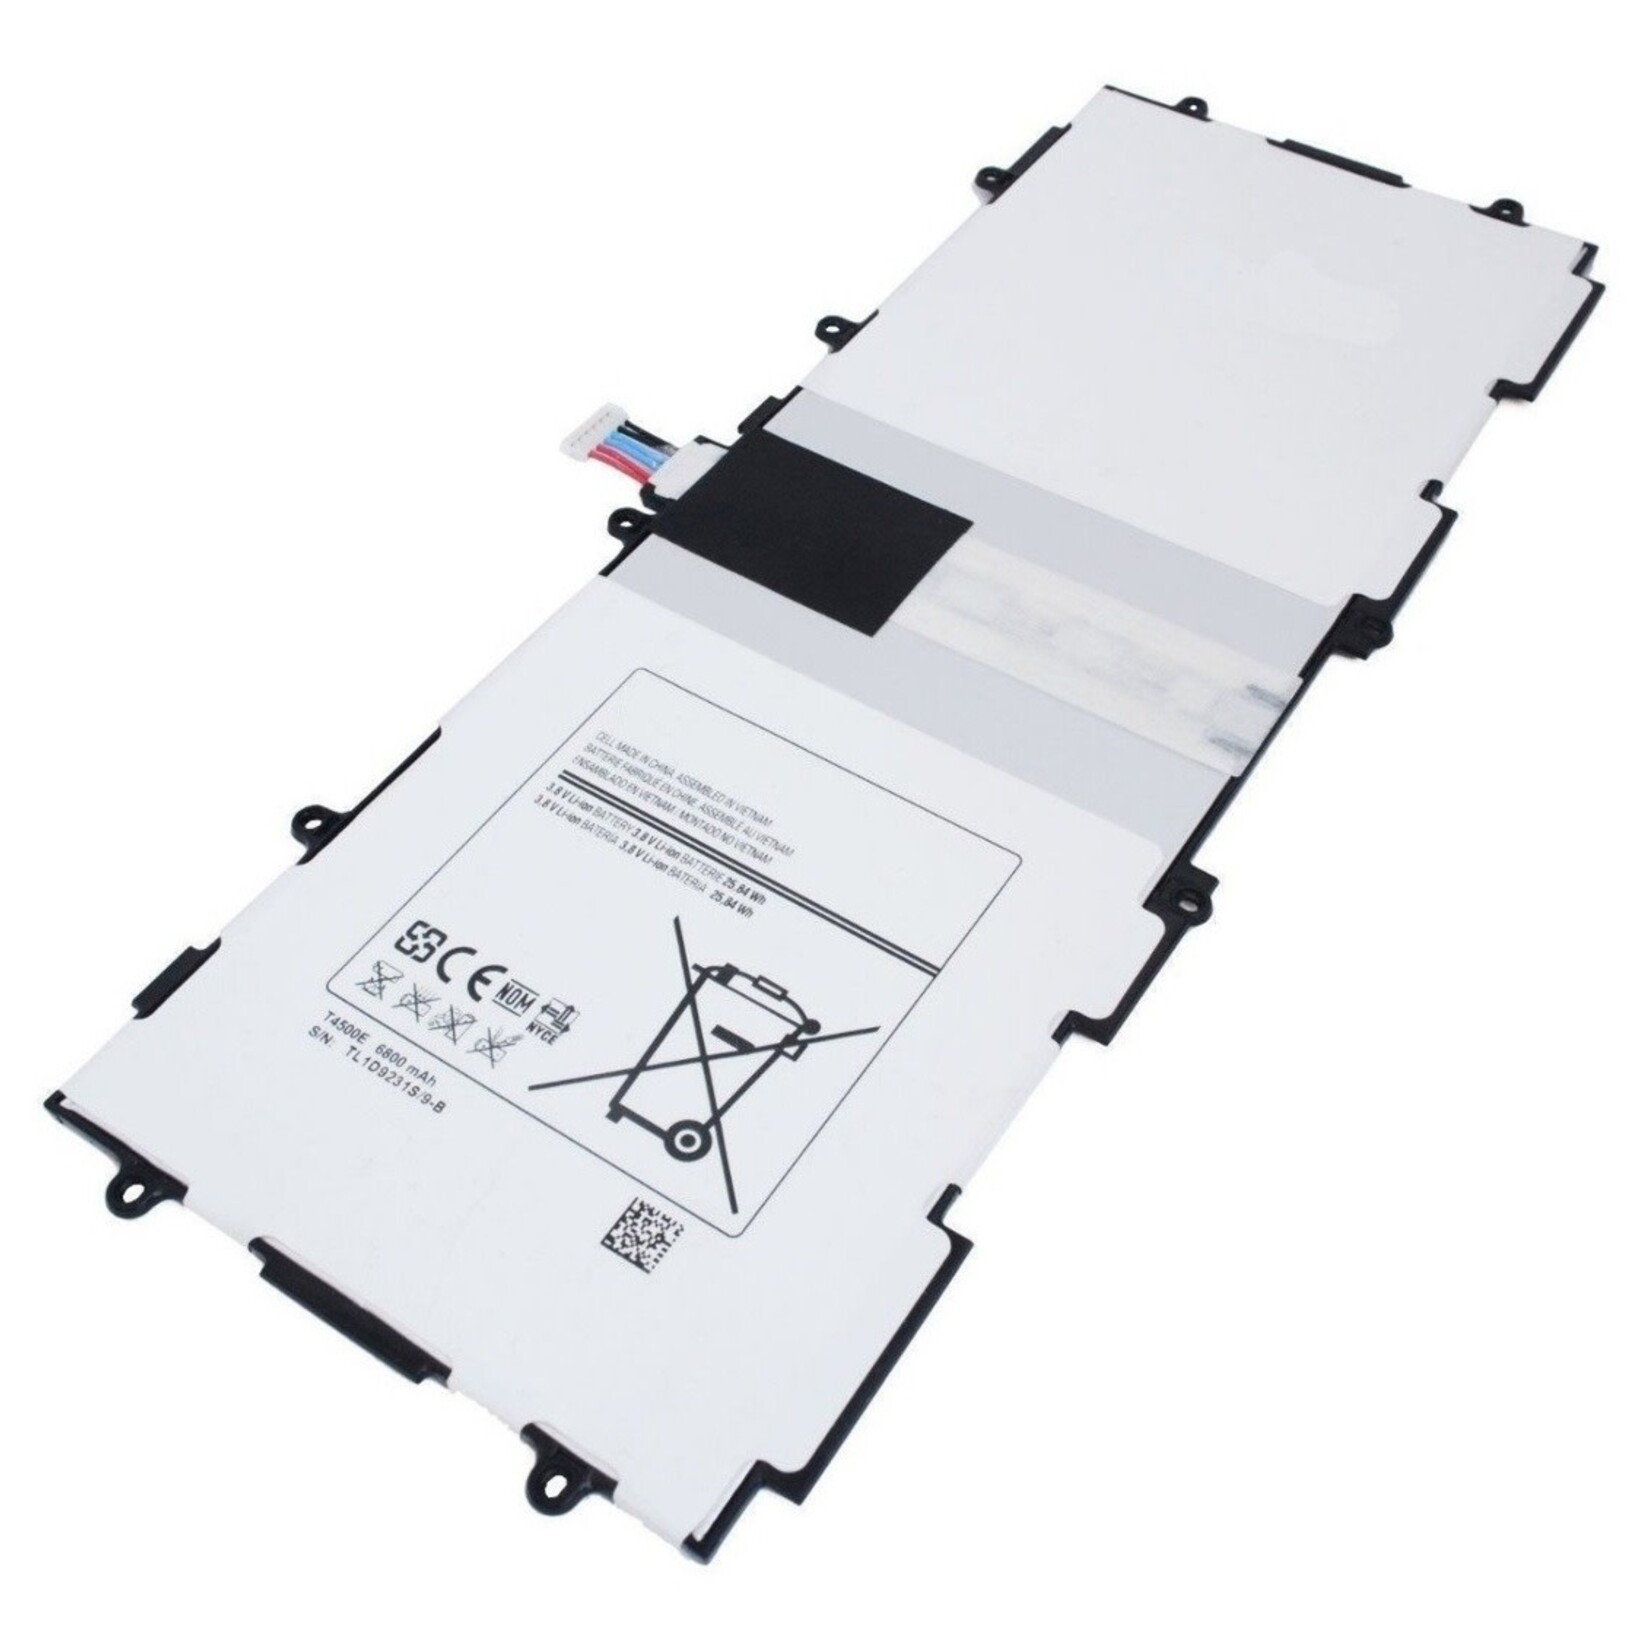 Samsung REPLACEMENT BATTERY SAMSUNG GALAXY TAB 3 10.1 P5210 / P5200